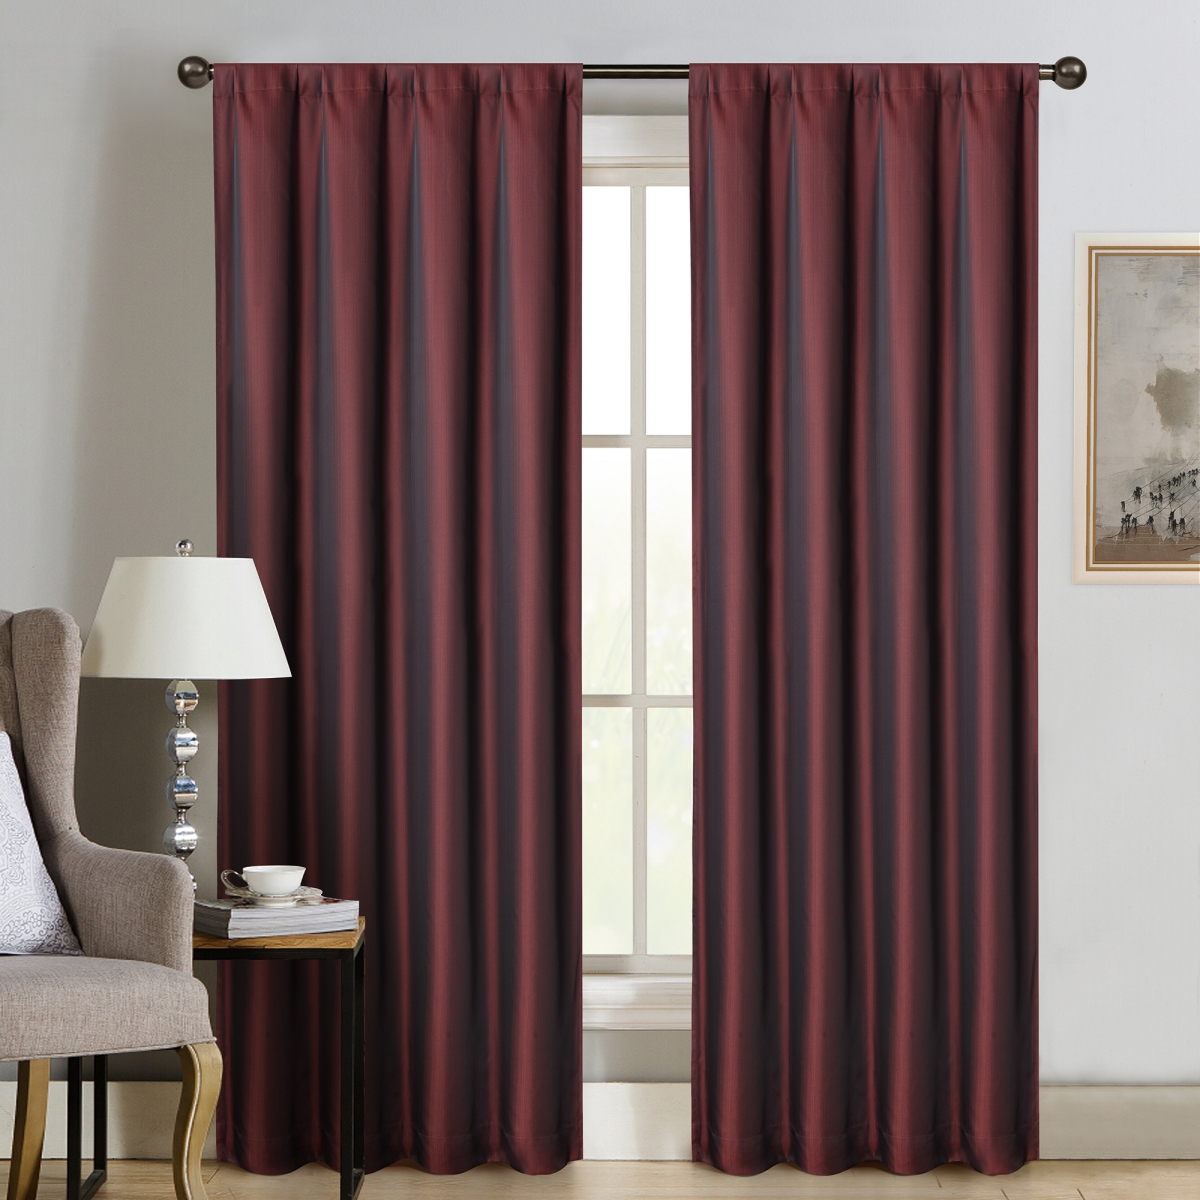 Crescent Double Layer Total Blackout Rod Pocket Single Curtain Panel 52"x84"